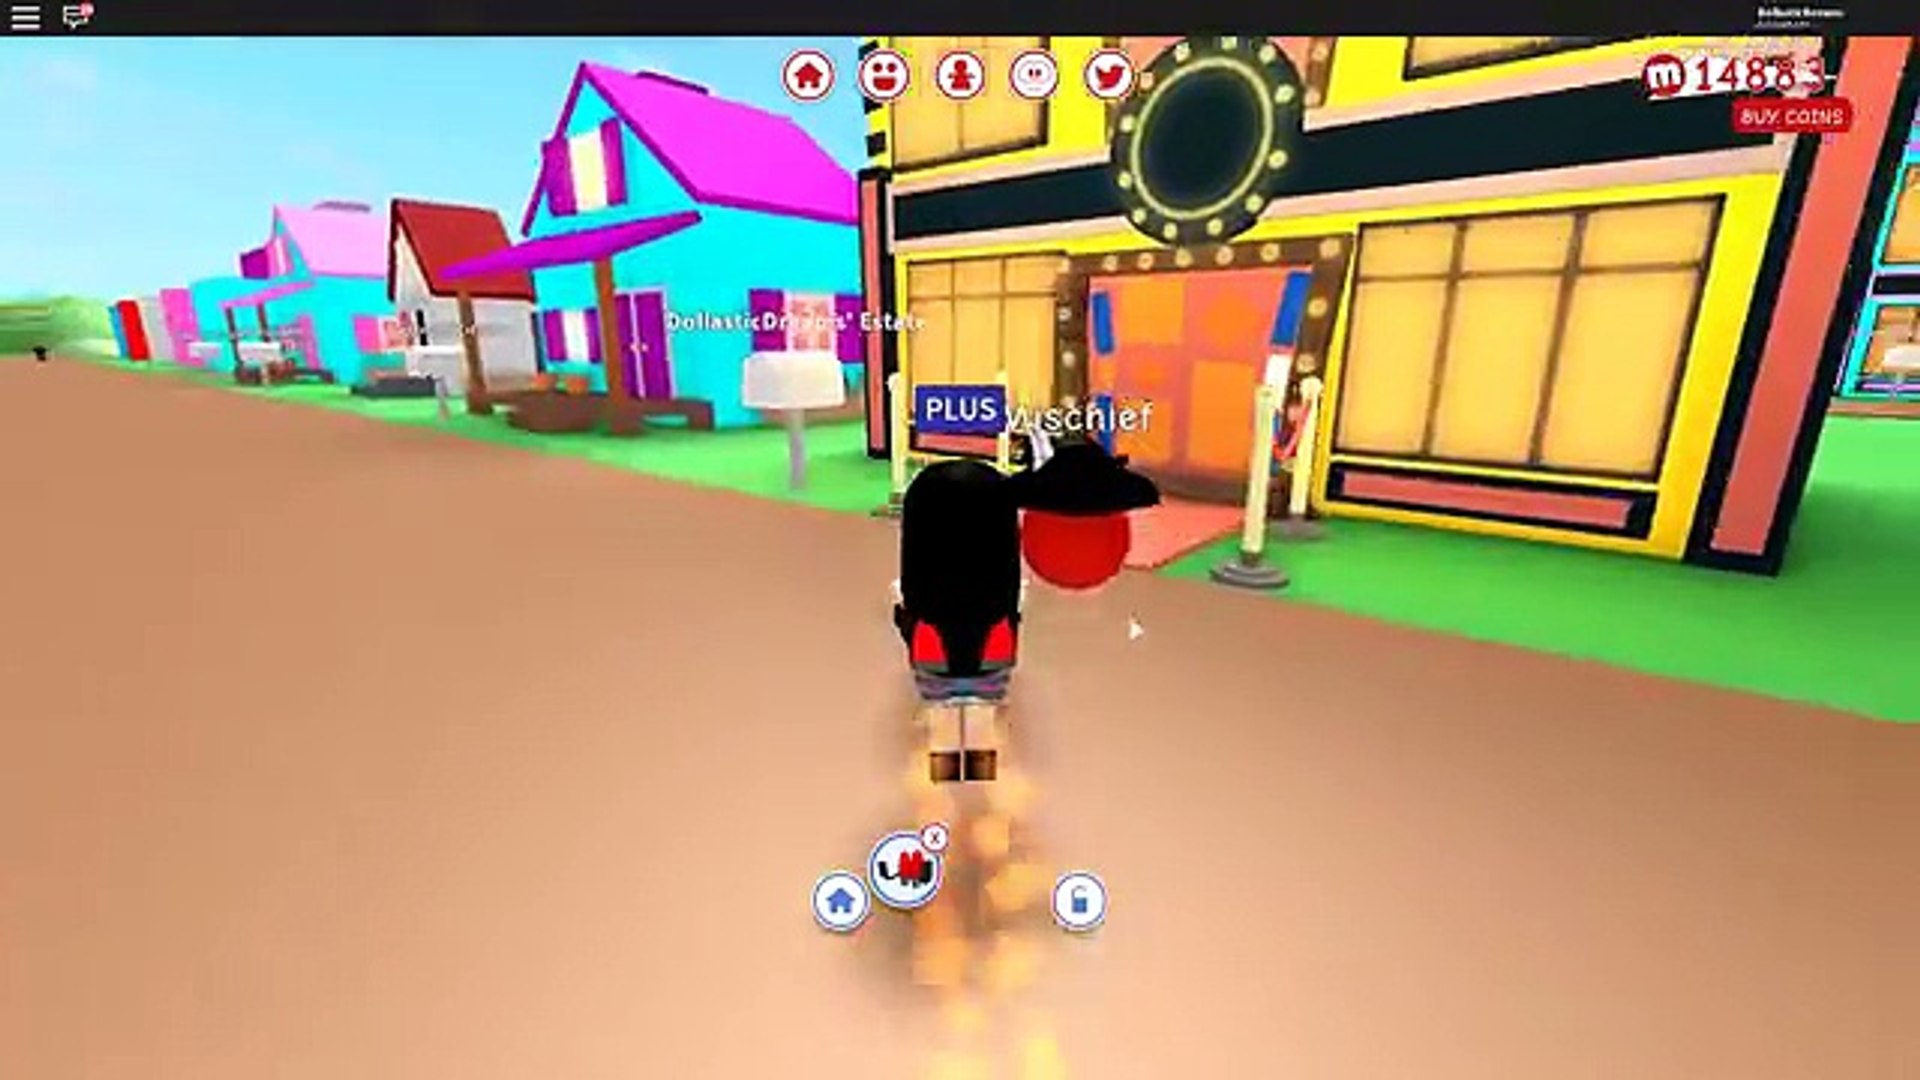 Lastic Goes Shopping Splurging New Meep Toys Jet Pack Roblox Meepcity Dollastic Plays - roblox baby alans new toys in meepcity adventures of